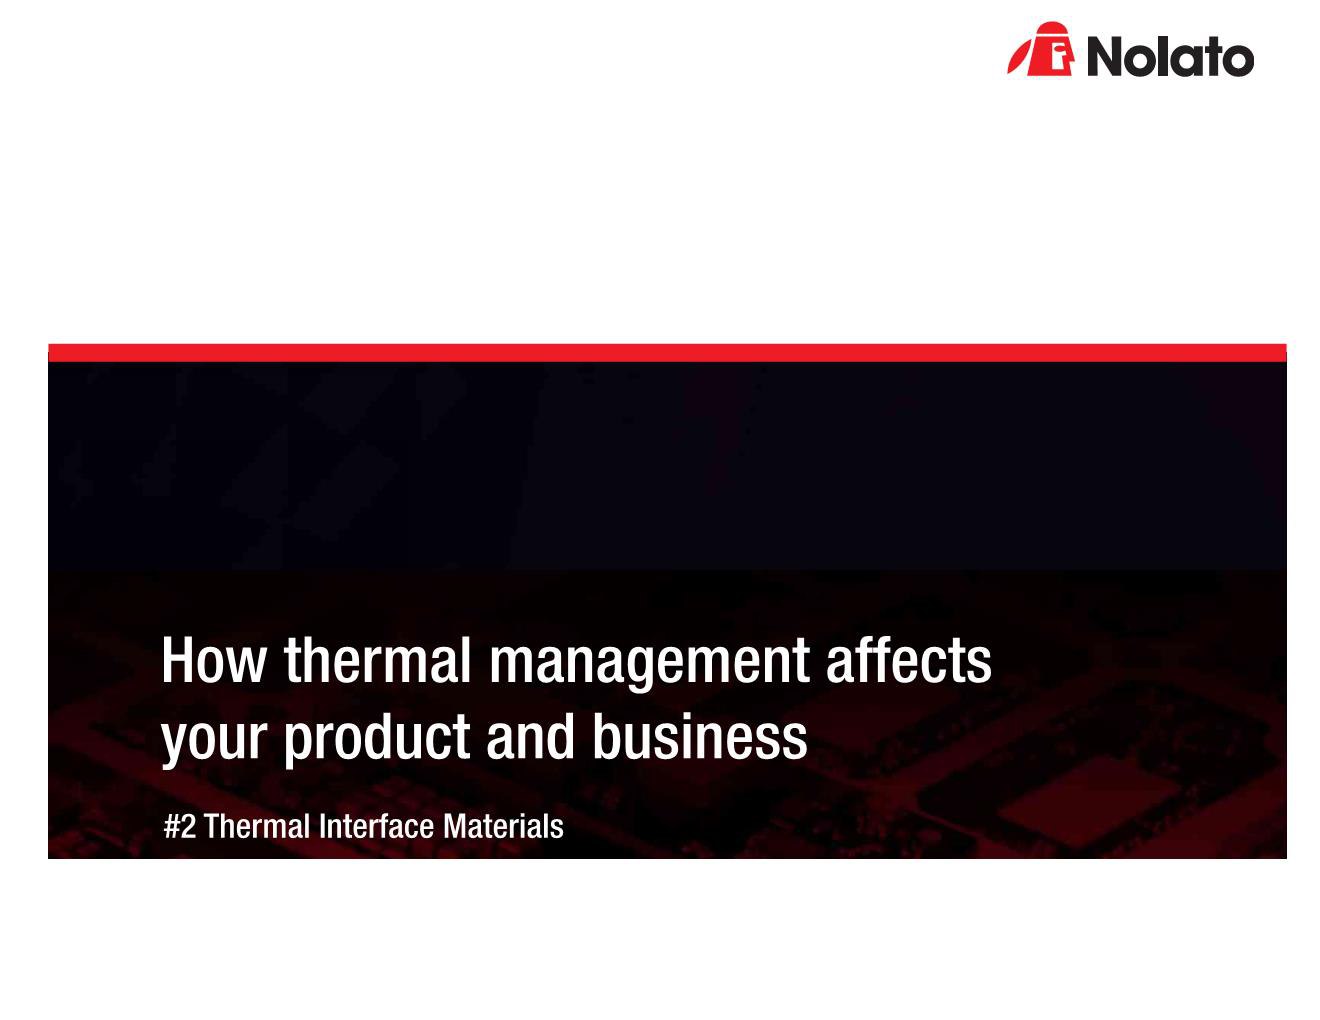 Nolato - How Thermal Management Affects Your Product and Business - White Paper #1